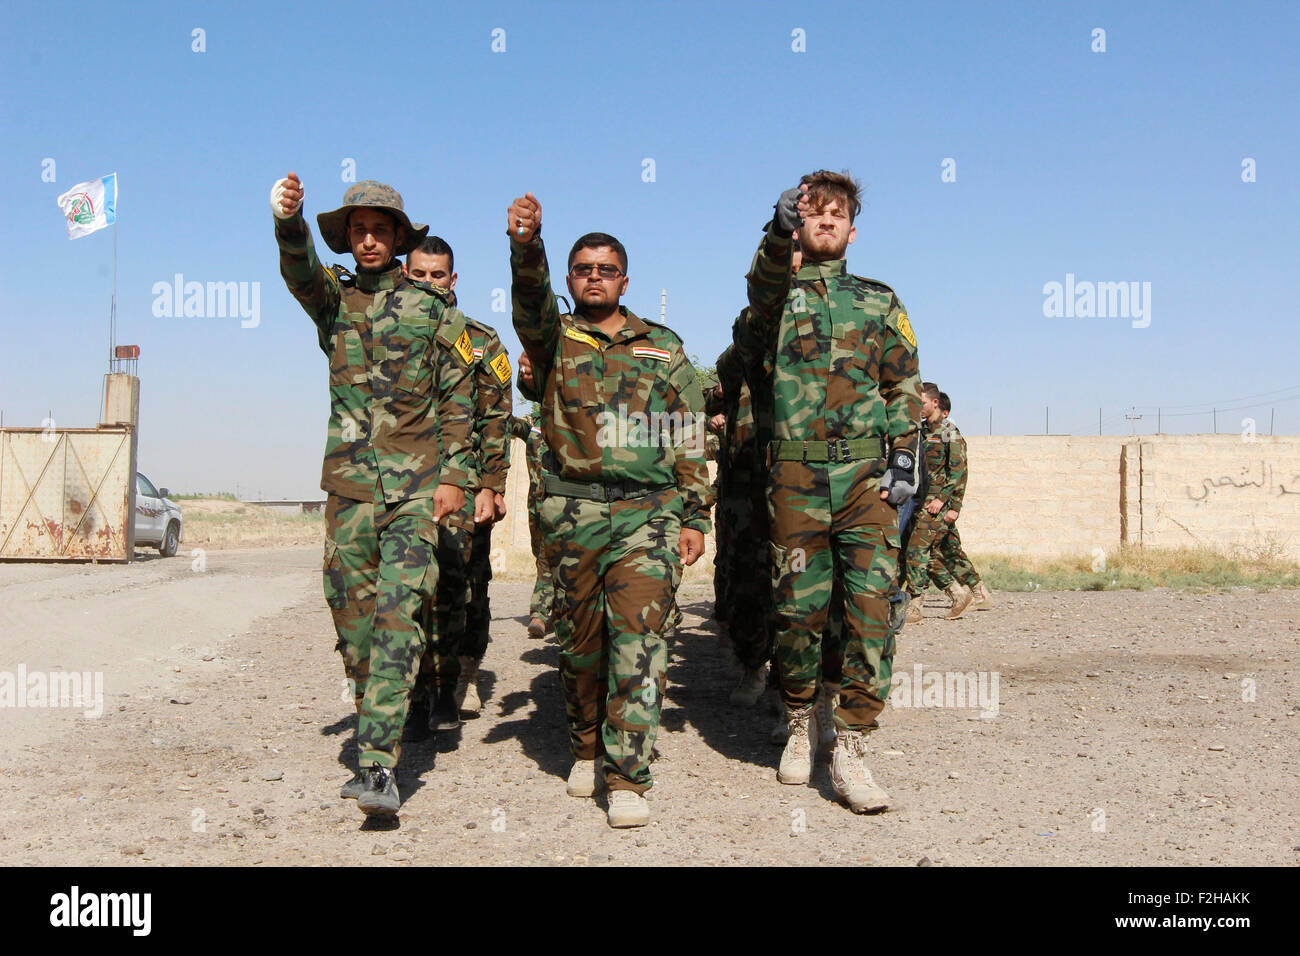 Kirkuk, Northern Iraq. 19th Sep, 2015. Fighters from Hashid Shaabi forces from paramilitary groups are reviewed at the end of their training period to fight Islamic State (IS) militants in the Kirkuk, Northern Iraq, Sept. 19, 2015. © Ako Zanagn/Xinhua/Alamy Live News Stock Photo